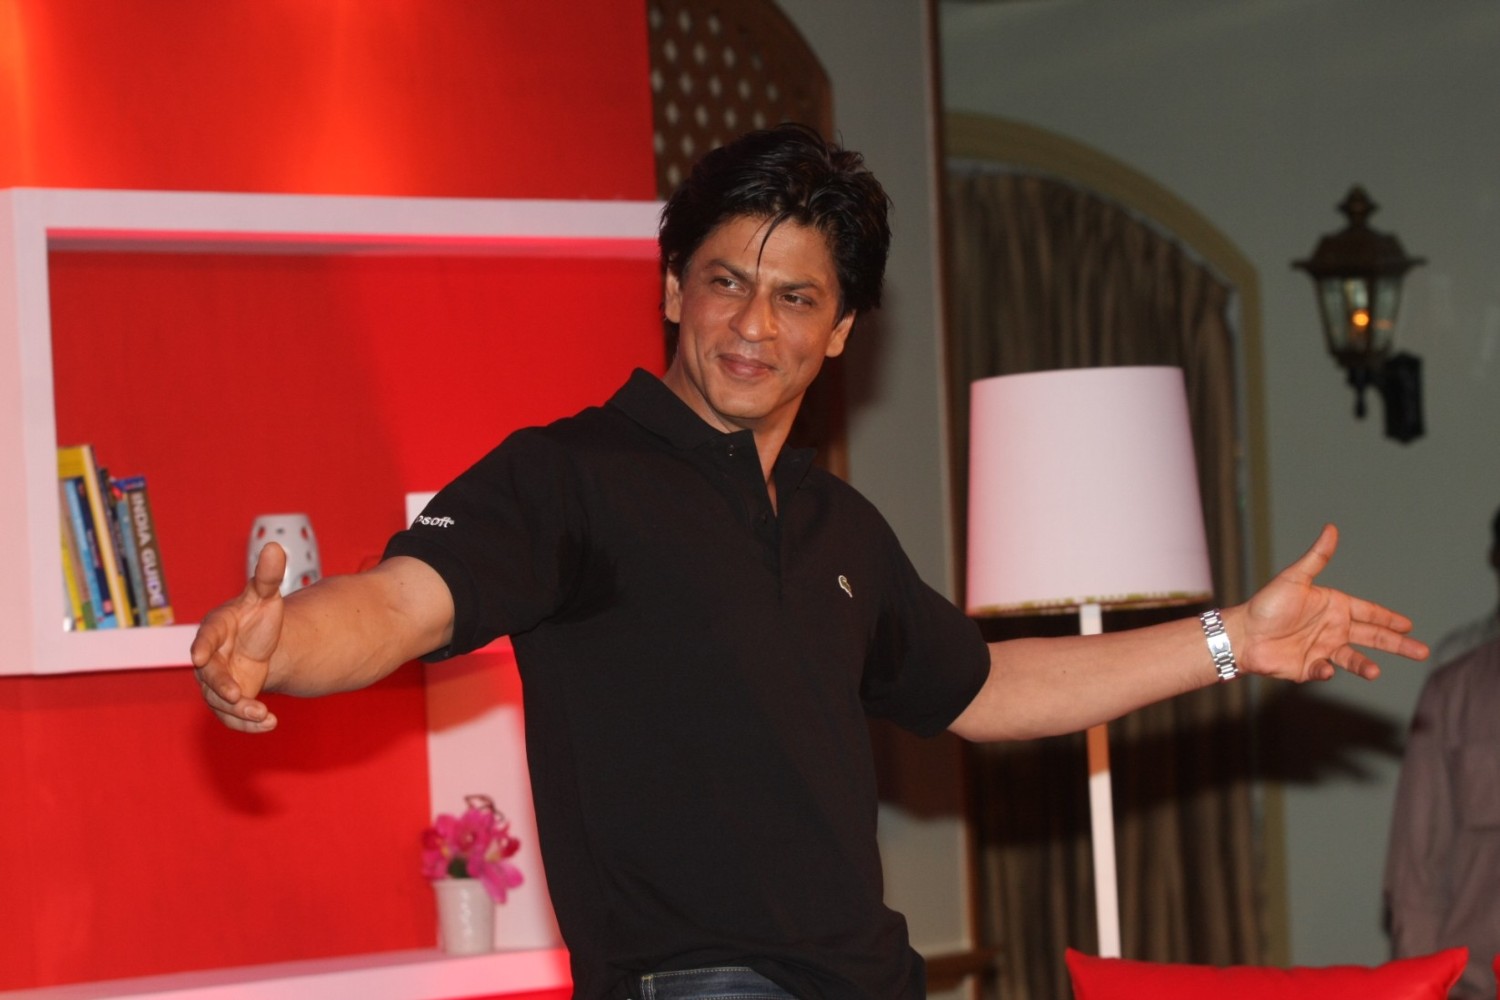 Shah Rukh Khan's iconic pose now a hashtag on Twitter! - Articles